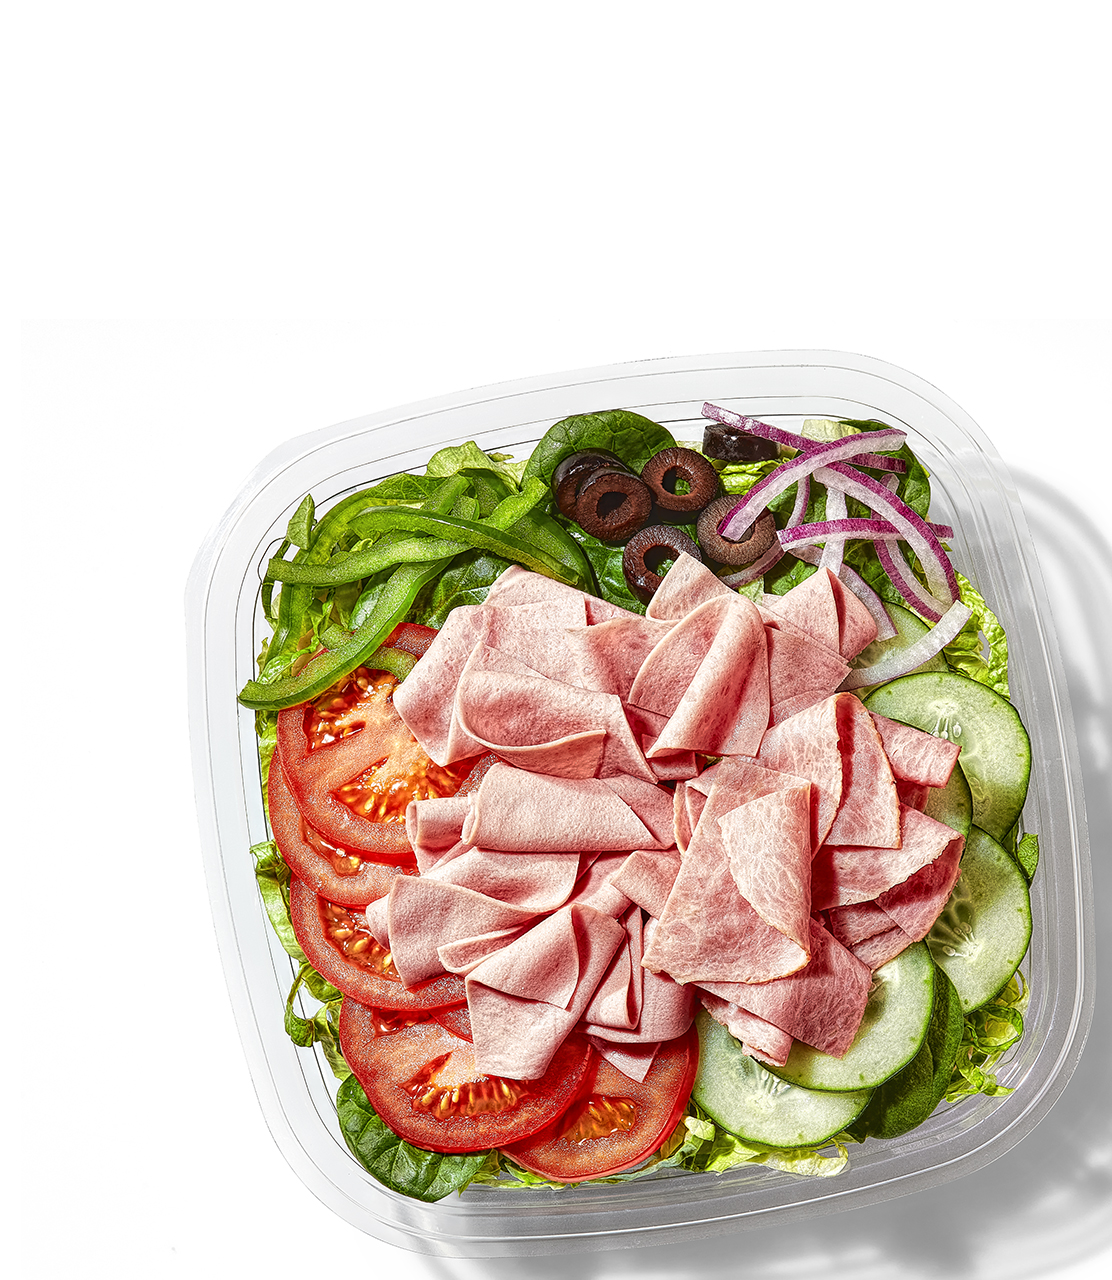 Cold Cut Combo Salad Simply Delivery